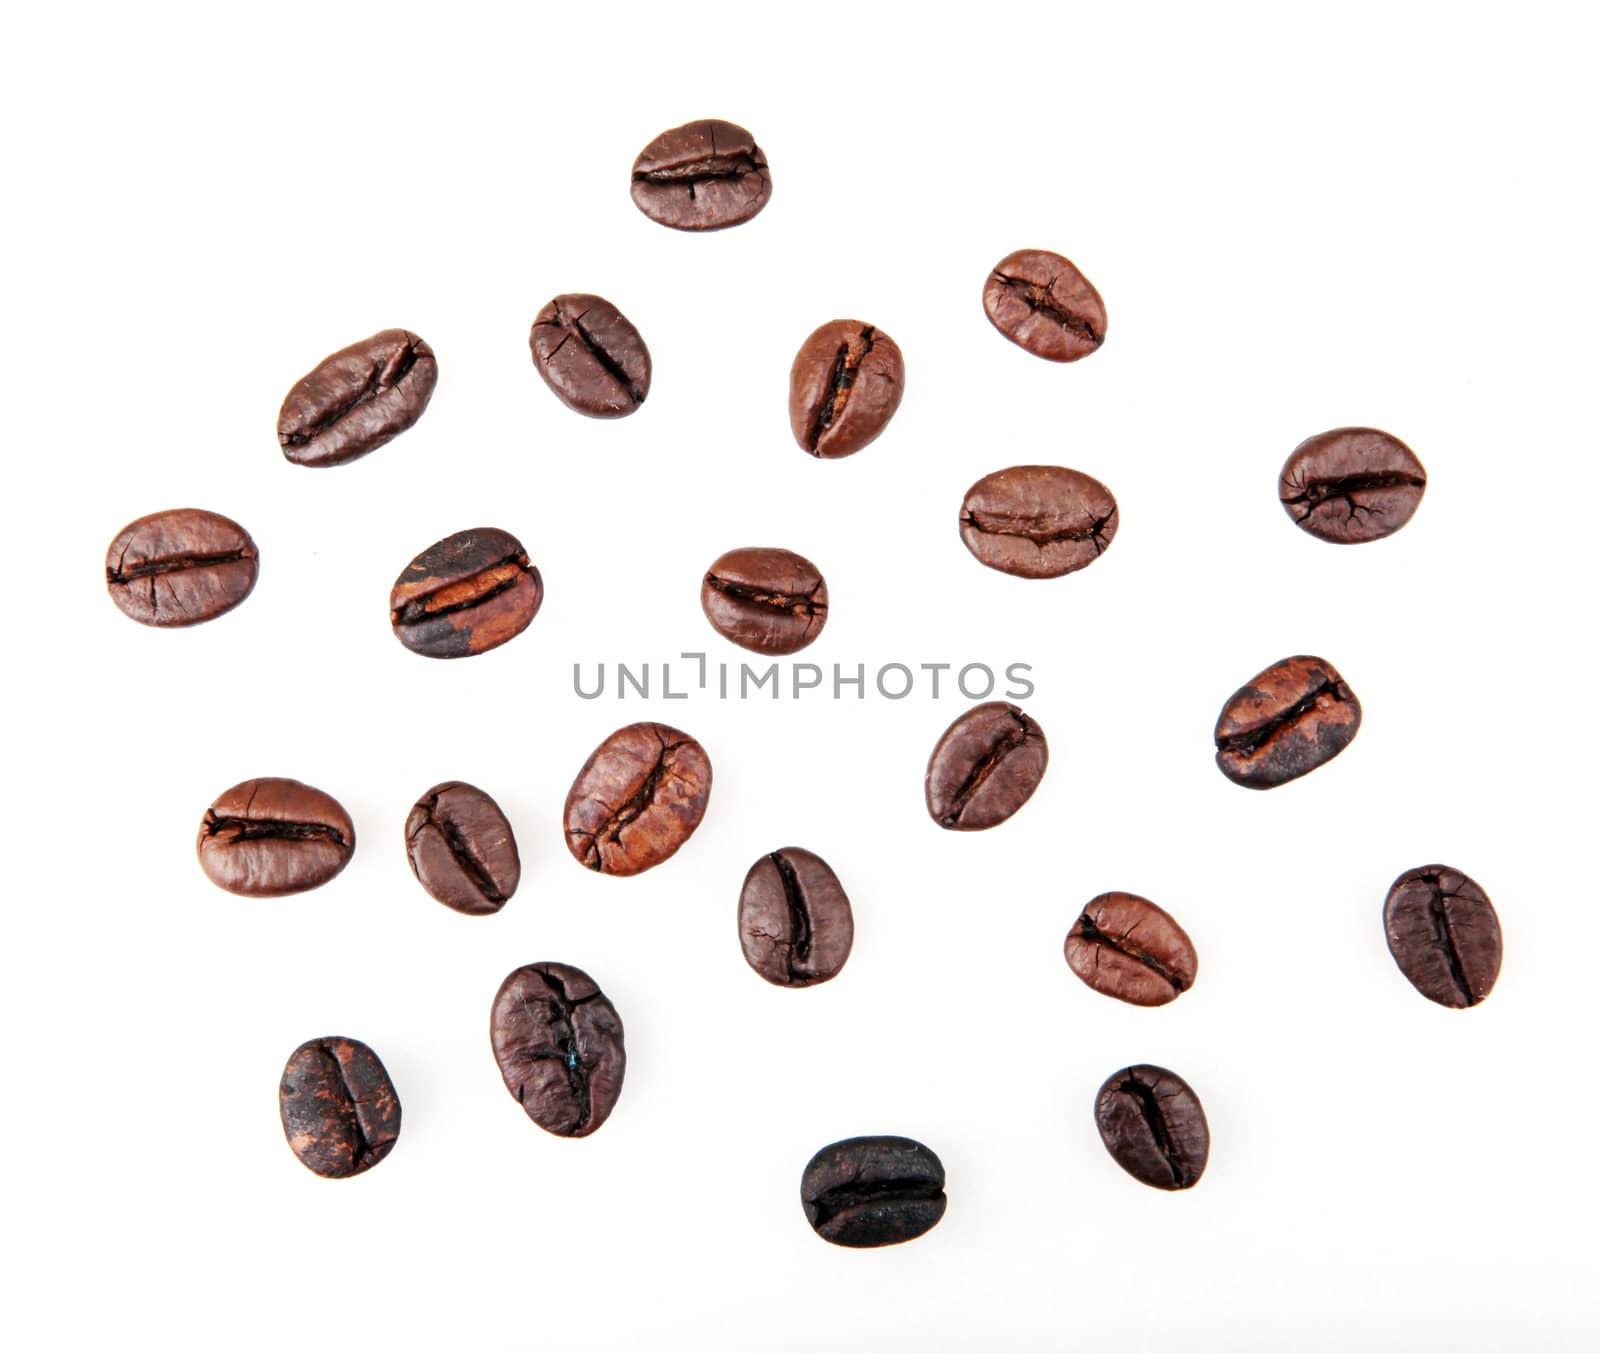 Coffee Beans Isolated On White Background